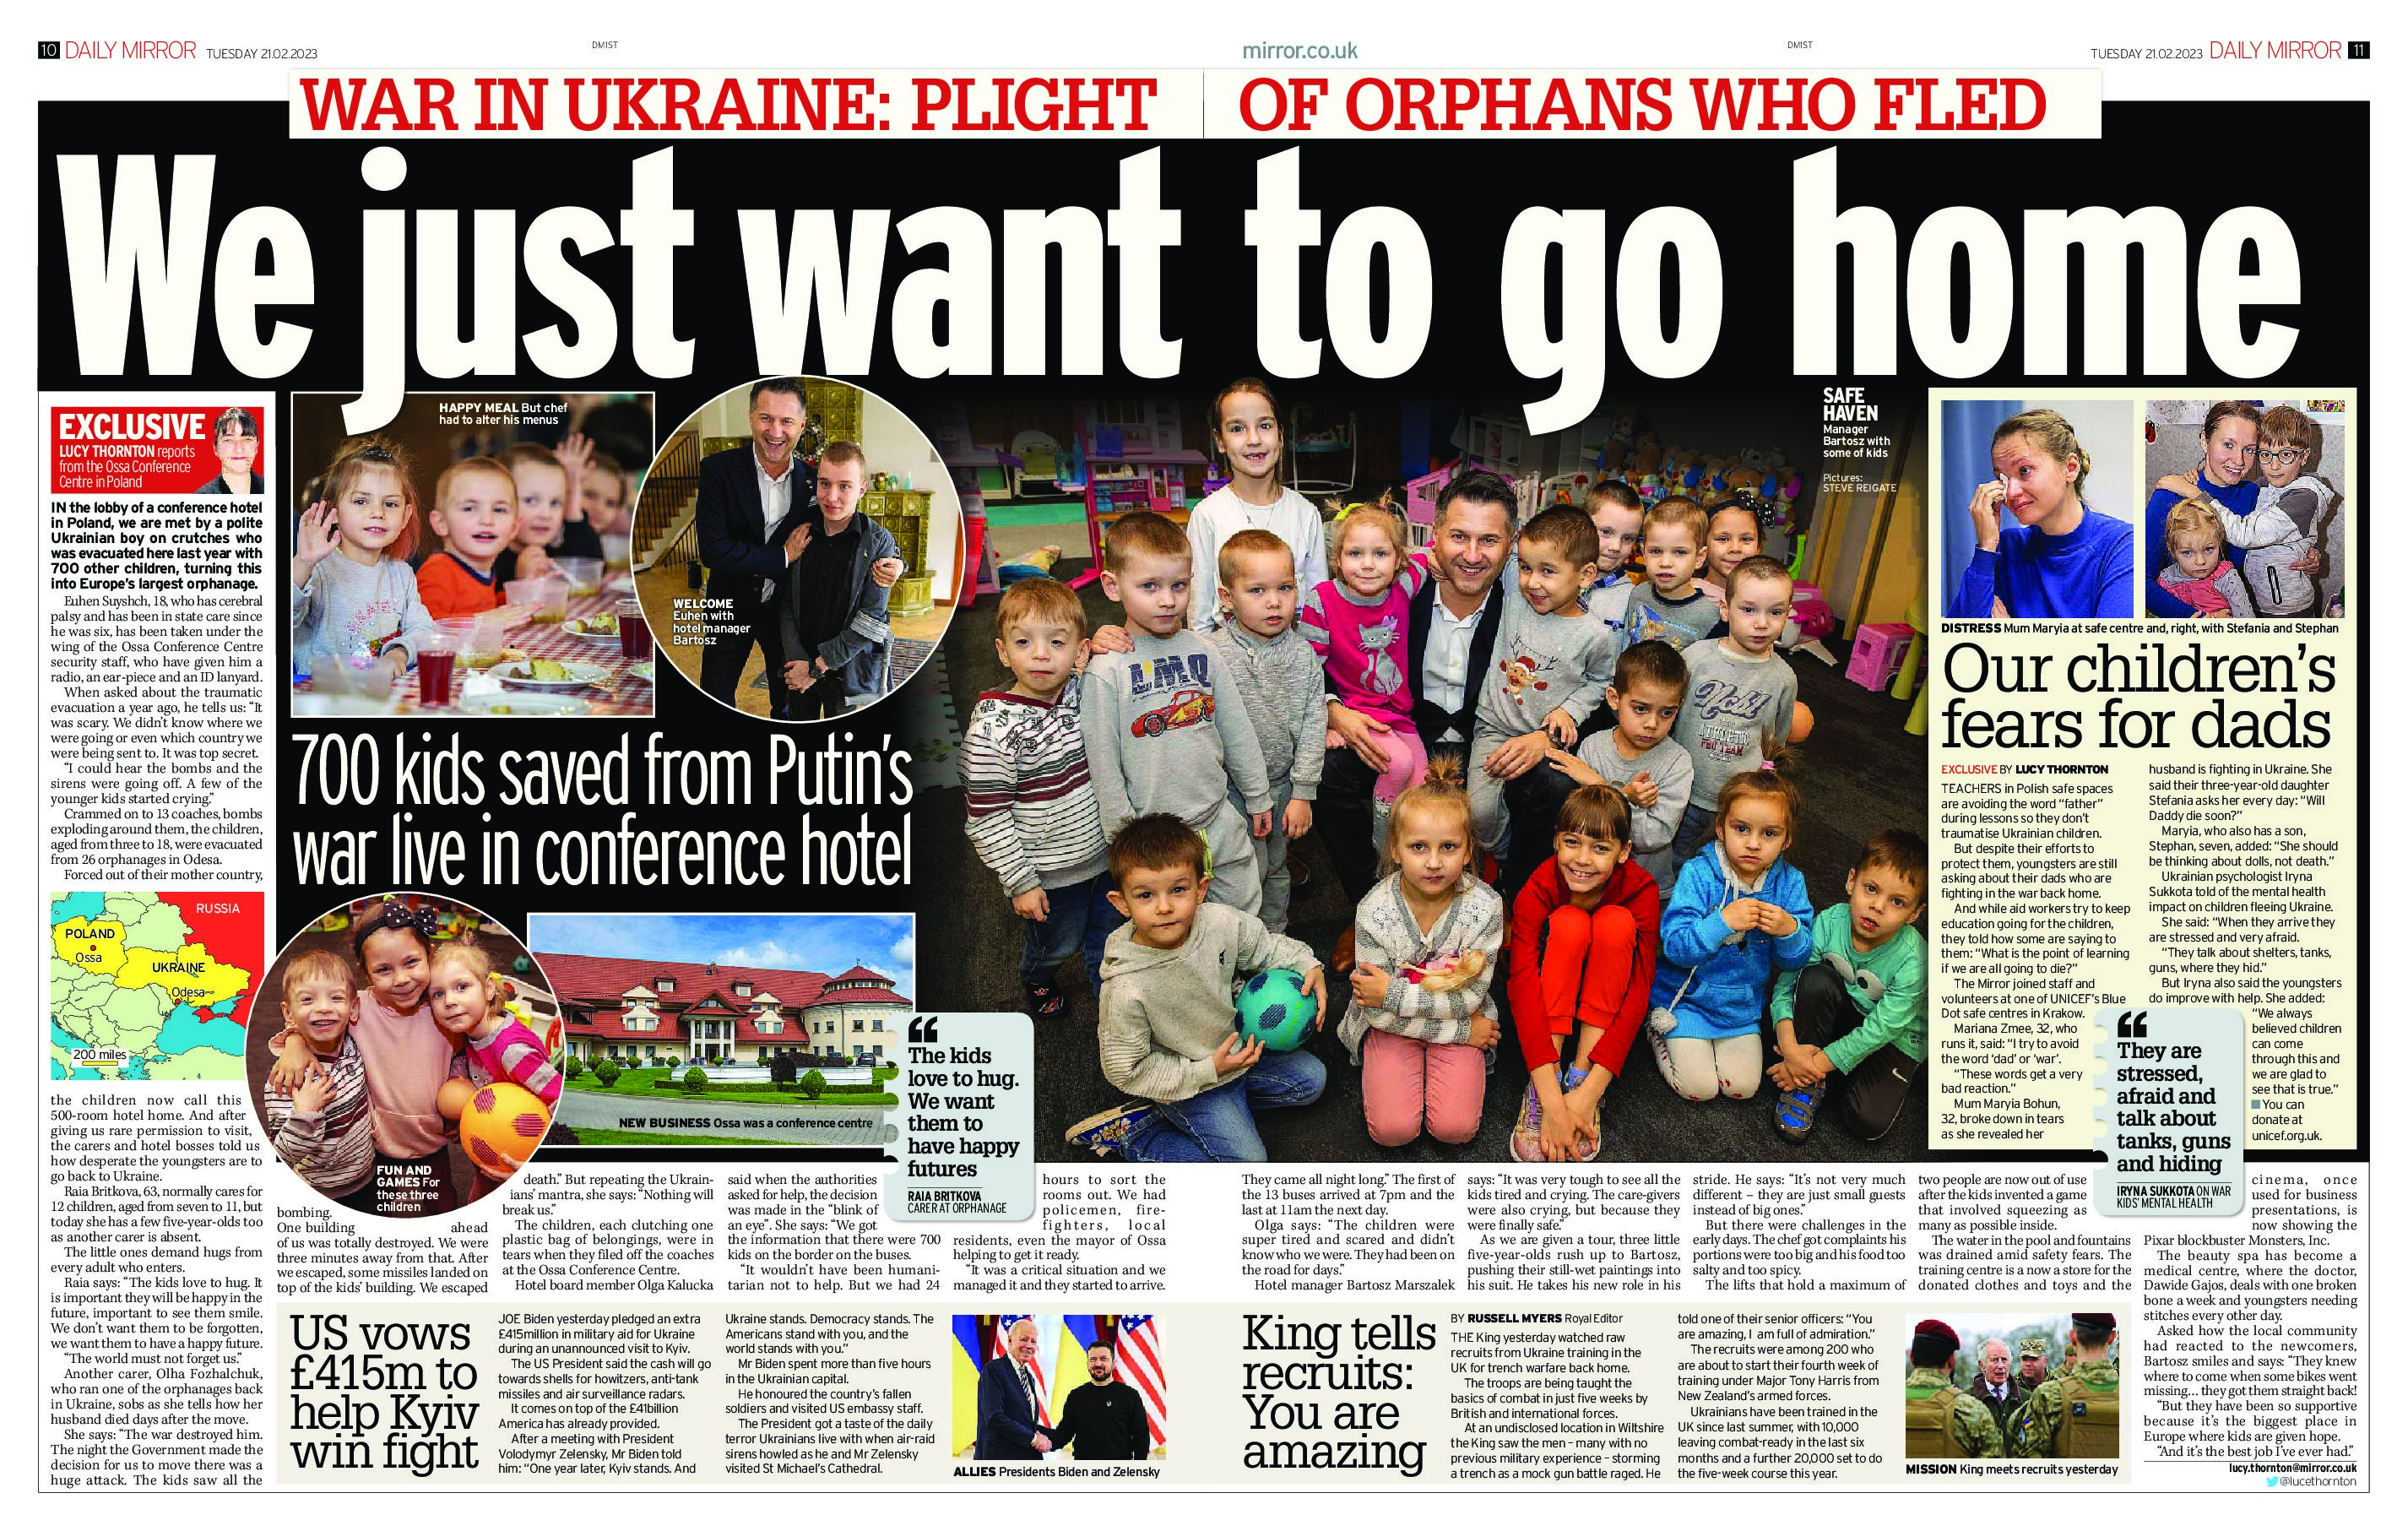 Daily Mirror – Desperate refugees beg ‘don’t let us die like this’